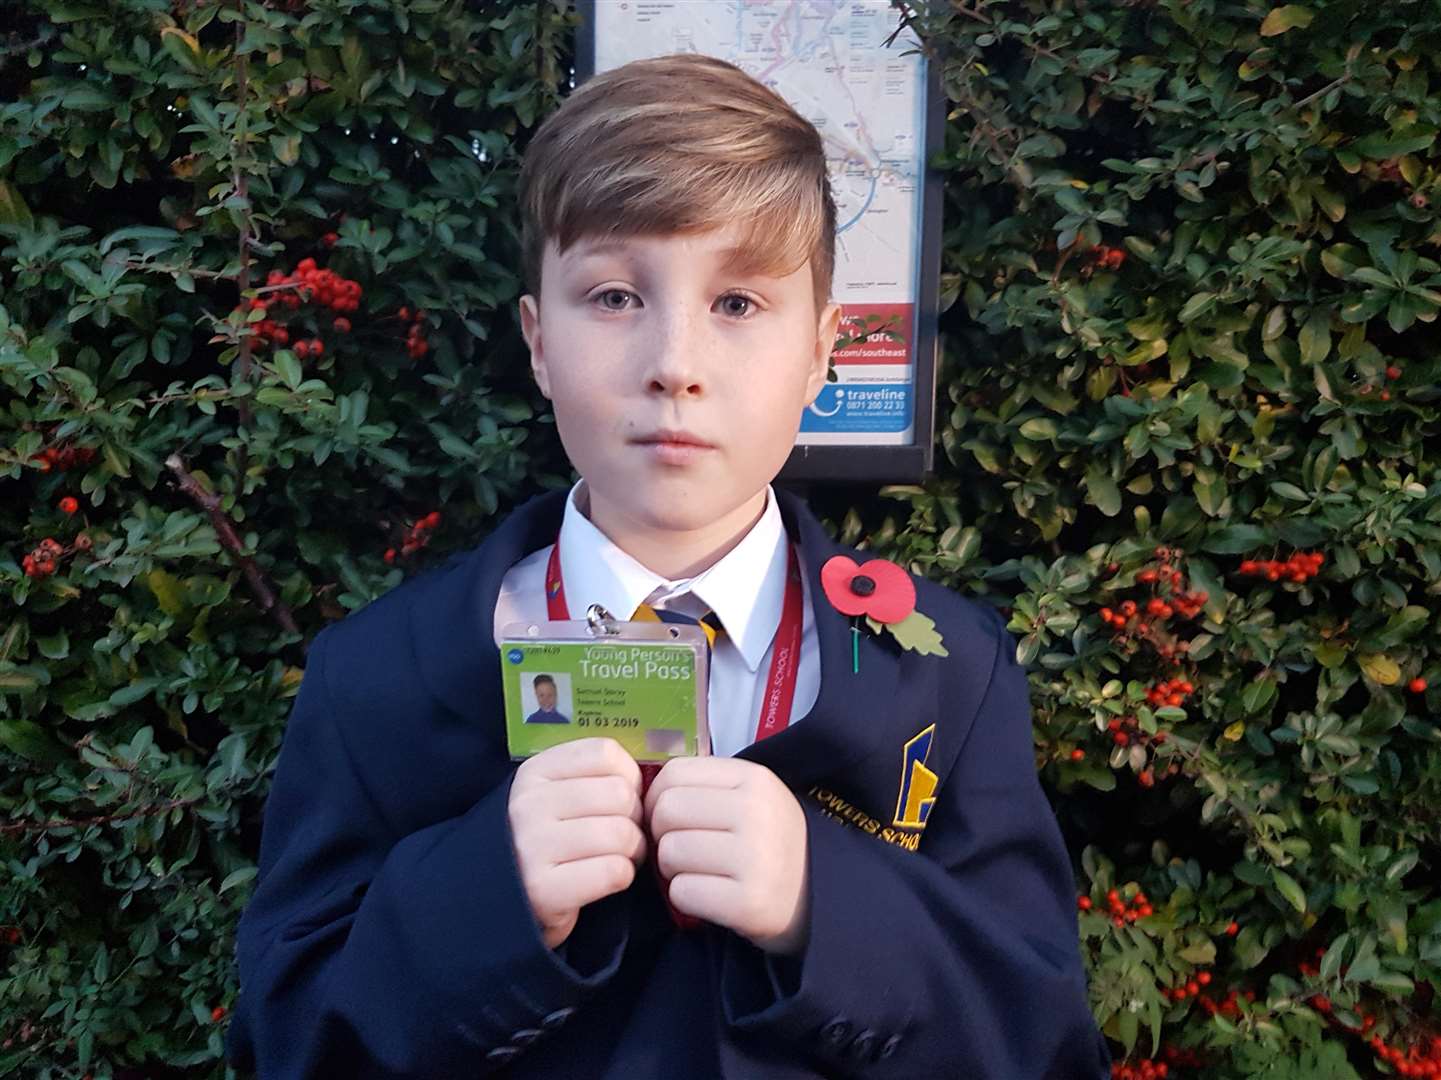 Sam Storey, 11, was left out in the pouring rain after he struggled to remove his bus pass